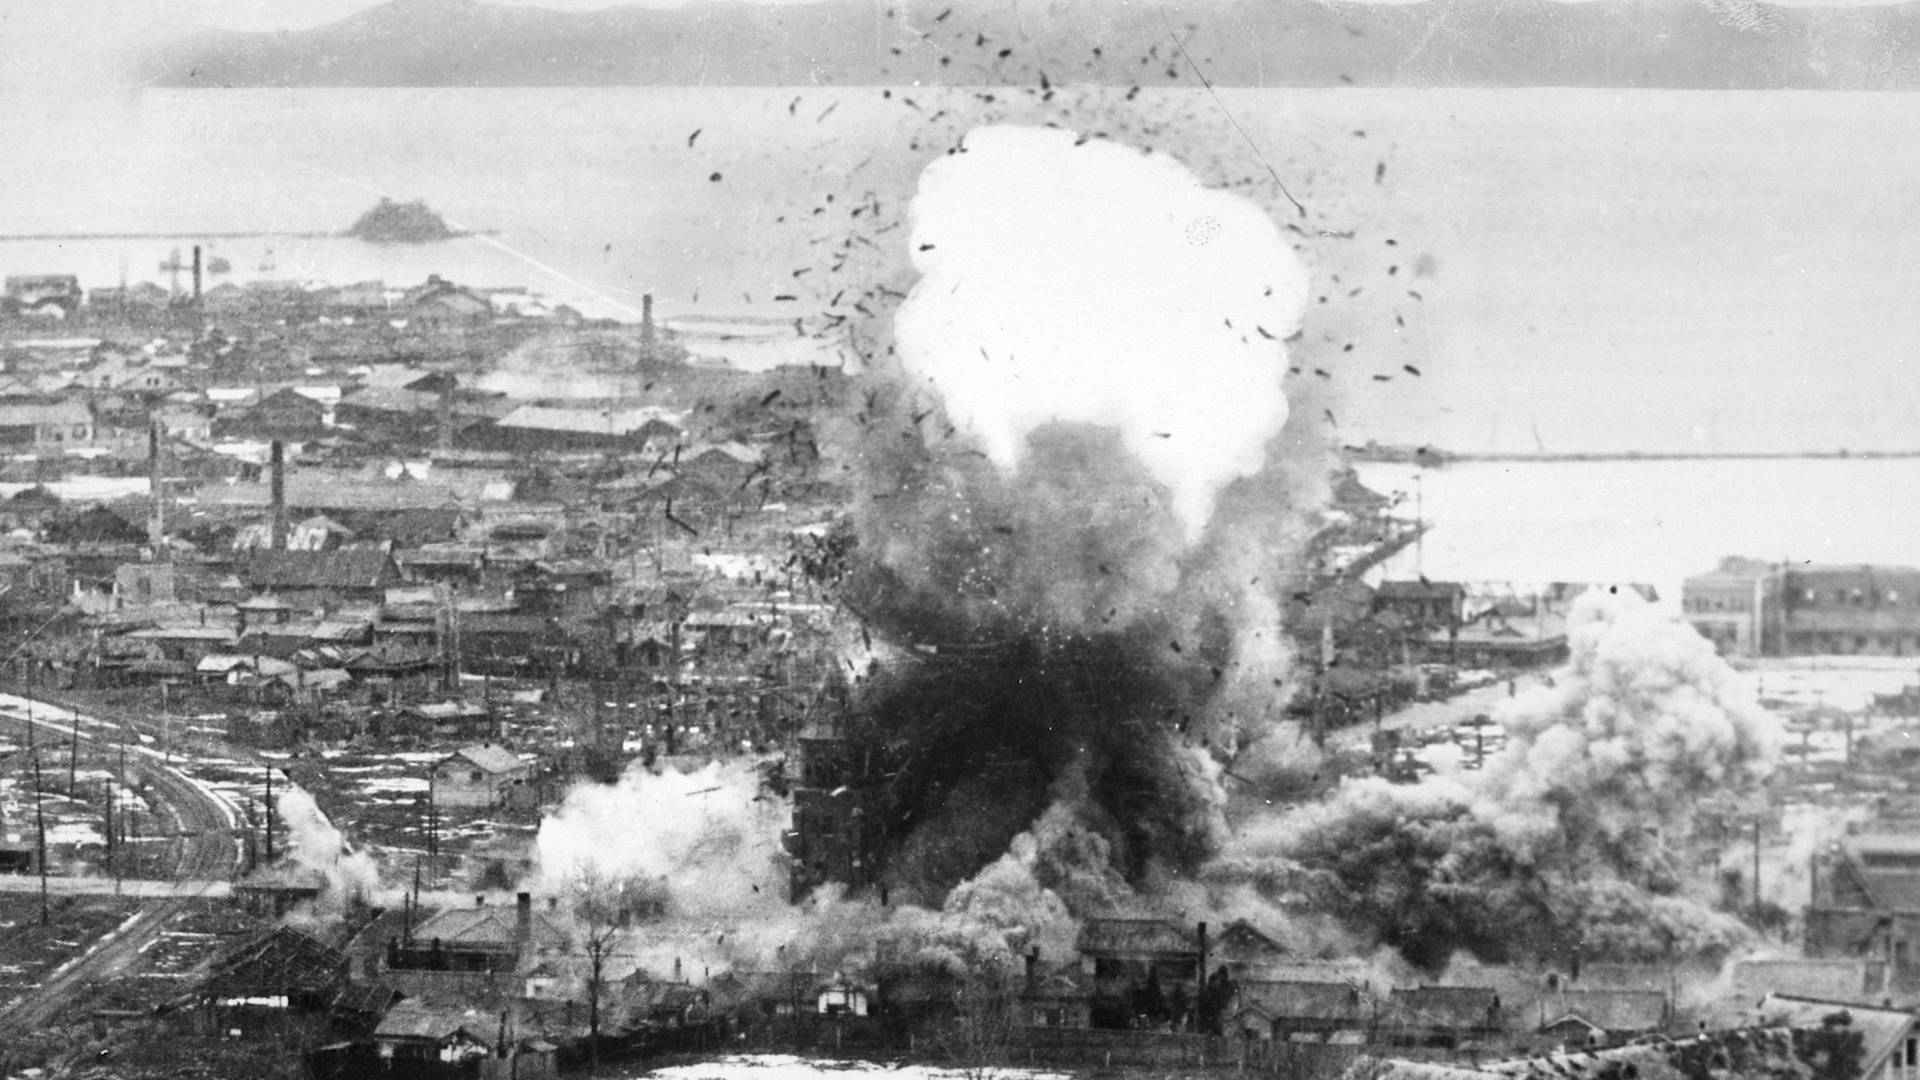 Prof. Bruce Cumings: U.S. Bombing in Korea More Destructive Than Damage to Germany, Japan in WWII